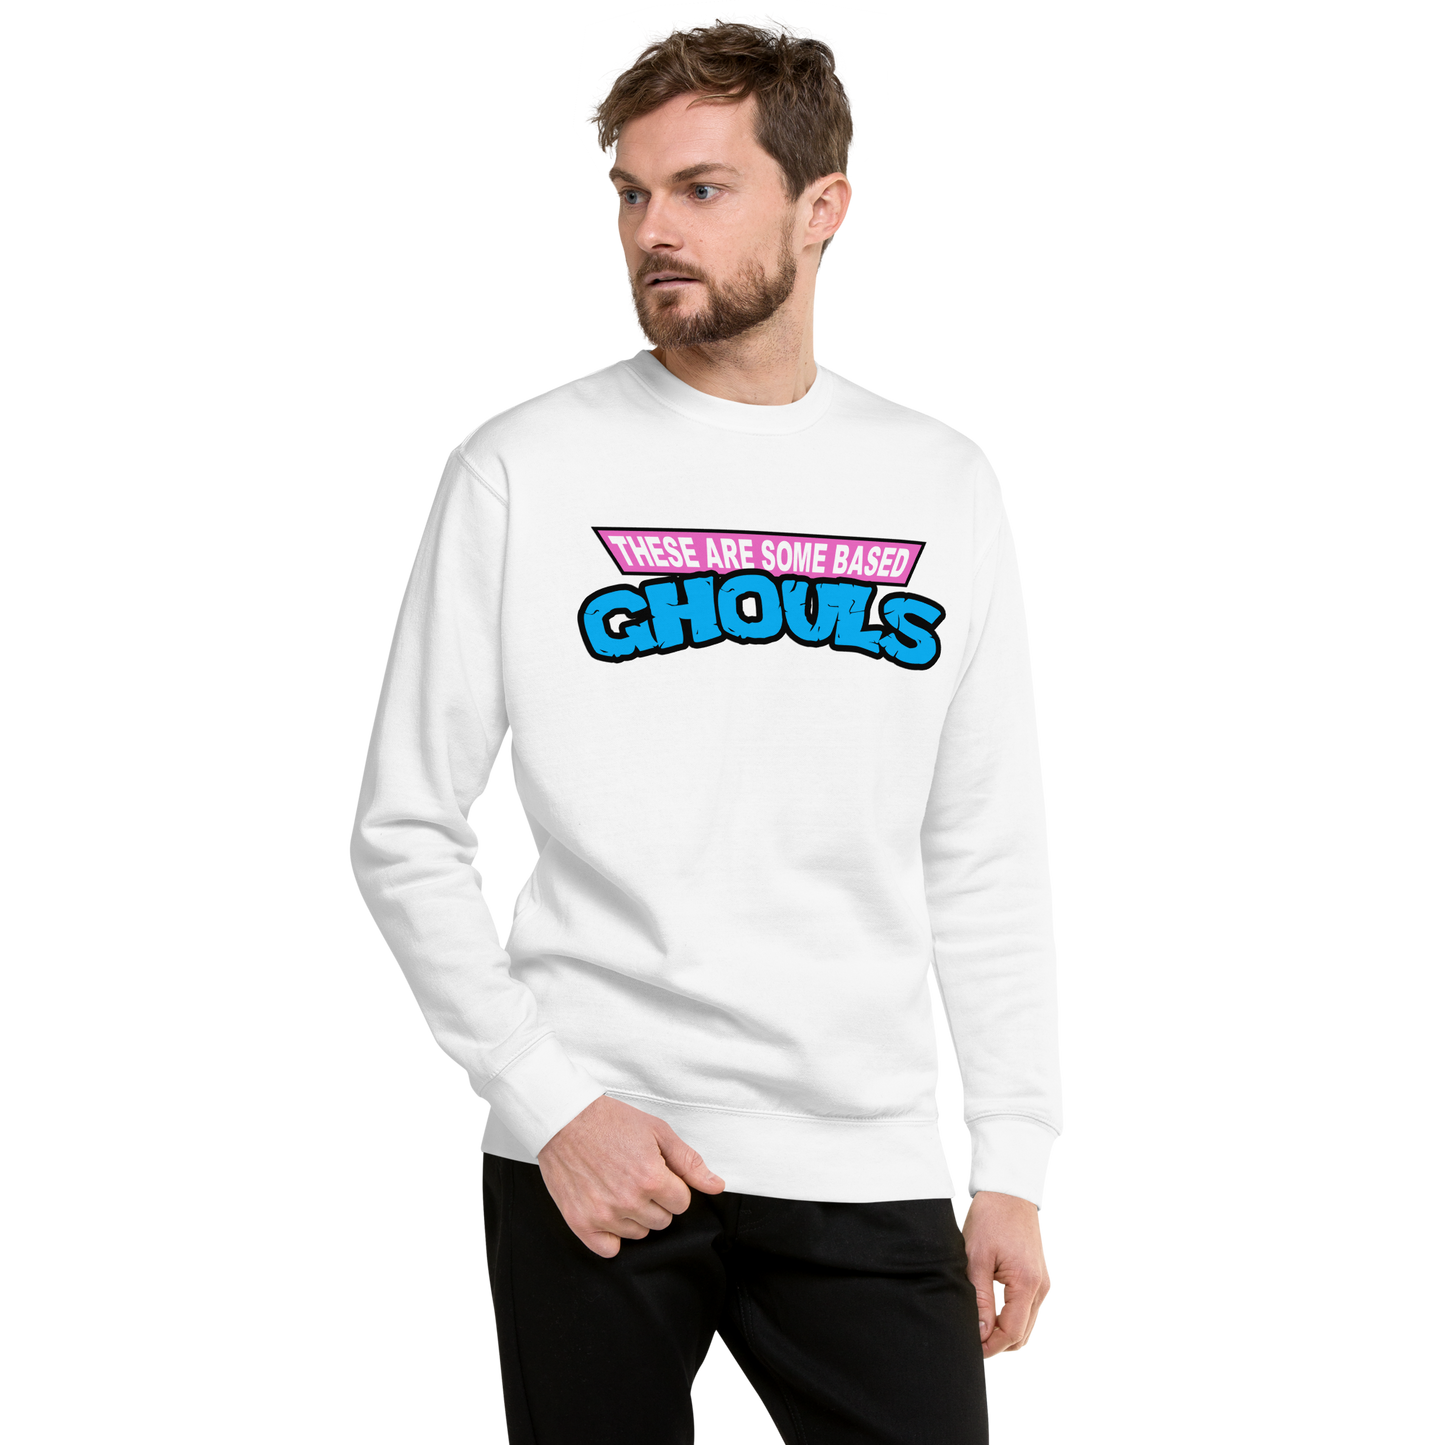 These Are Some Based GHOULS Sweatshirt